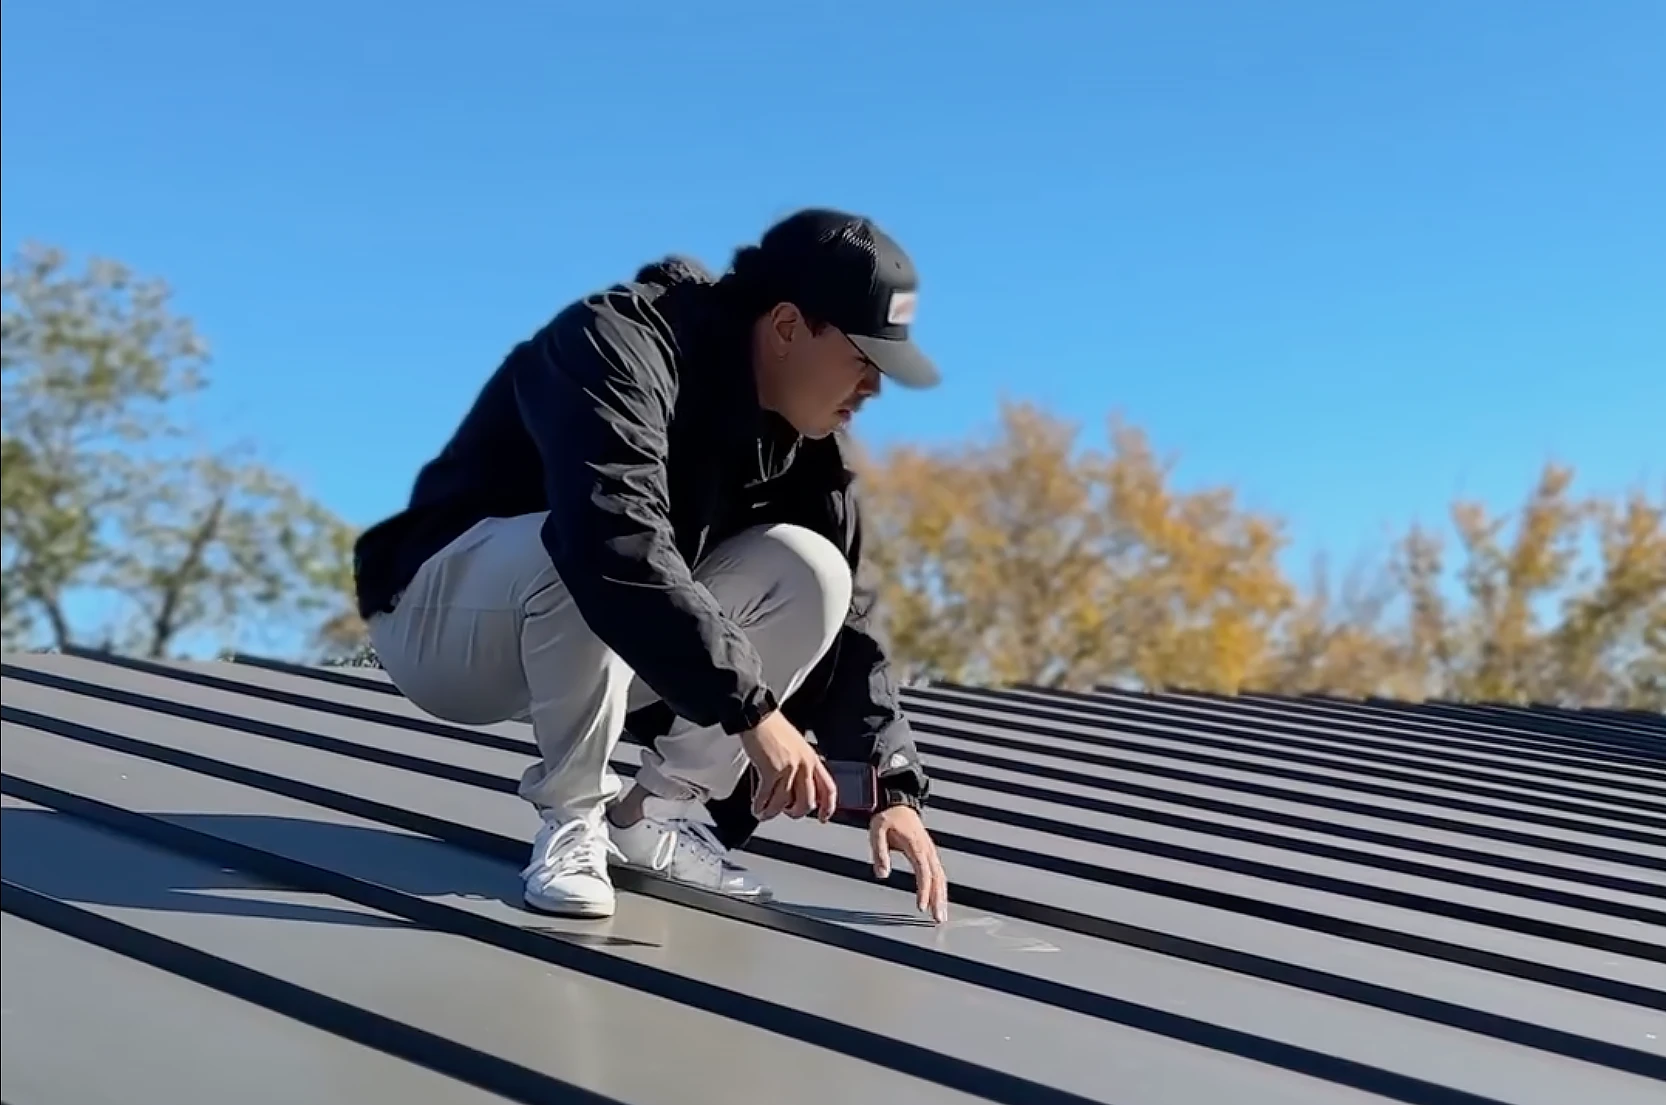 Chase Coats from Roam Roof and Solar Sales Specialist inspecting a roof.